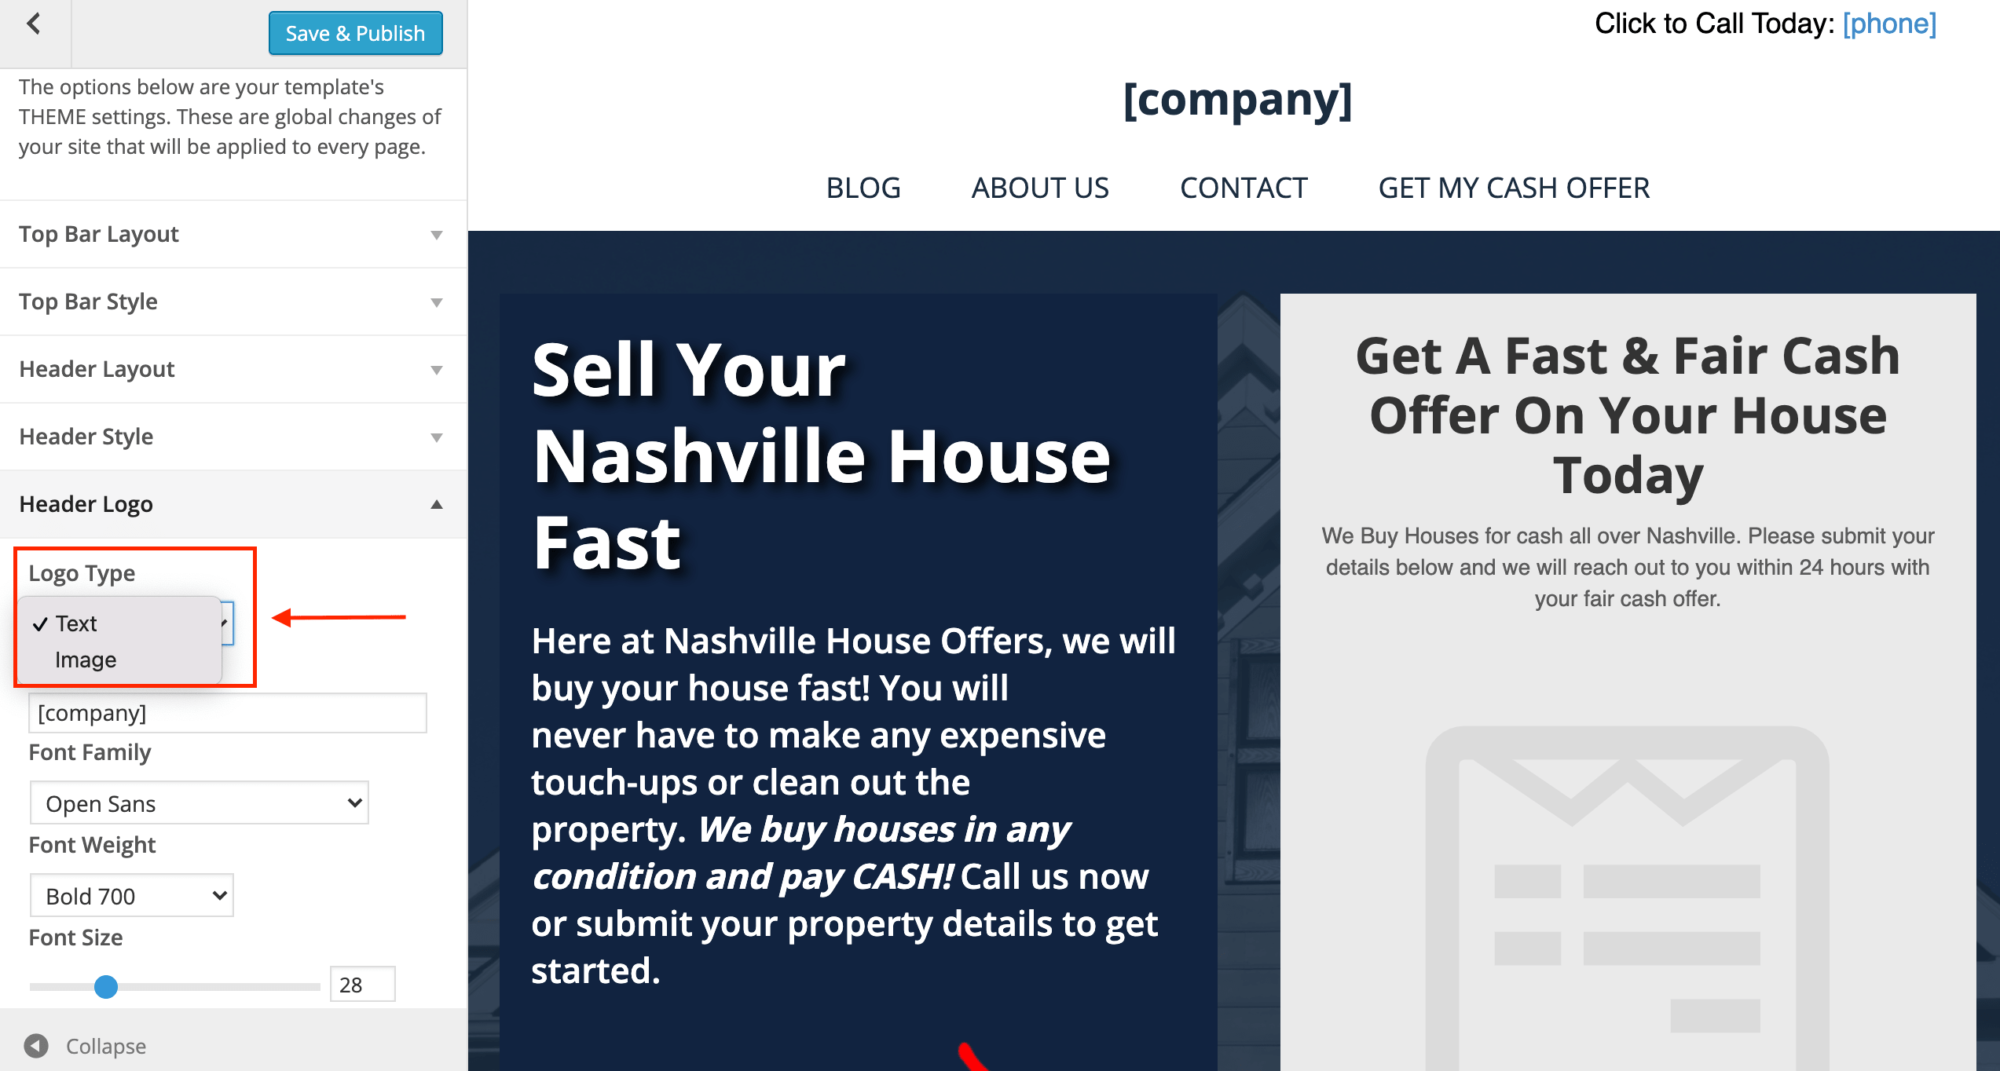 If you don't have a logo image, select "Text" for your real estate investor website header.